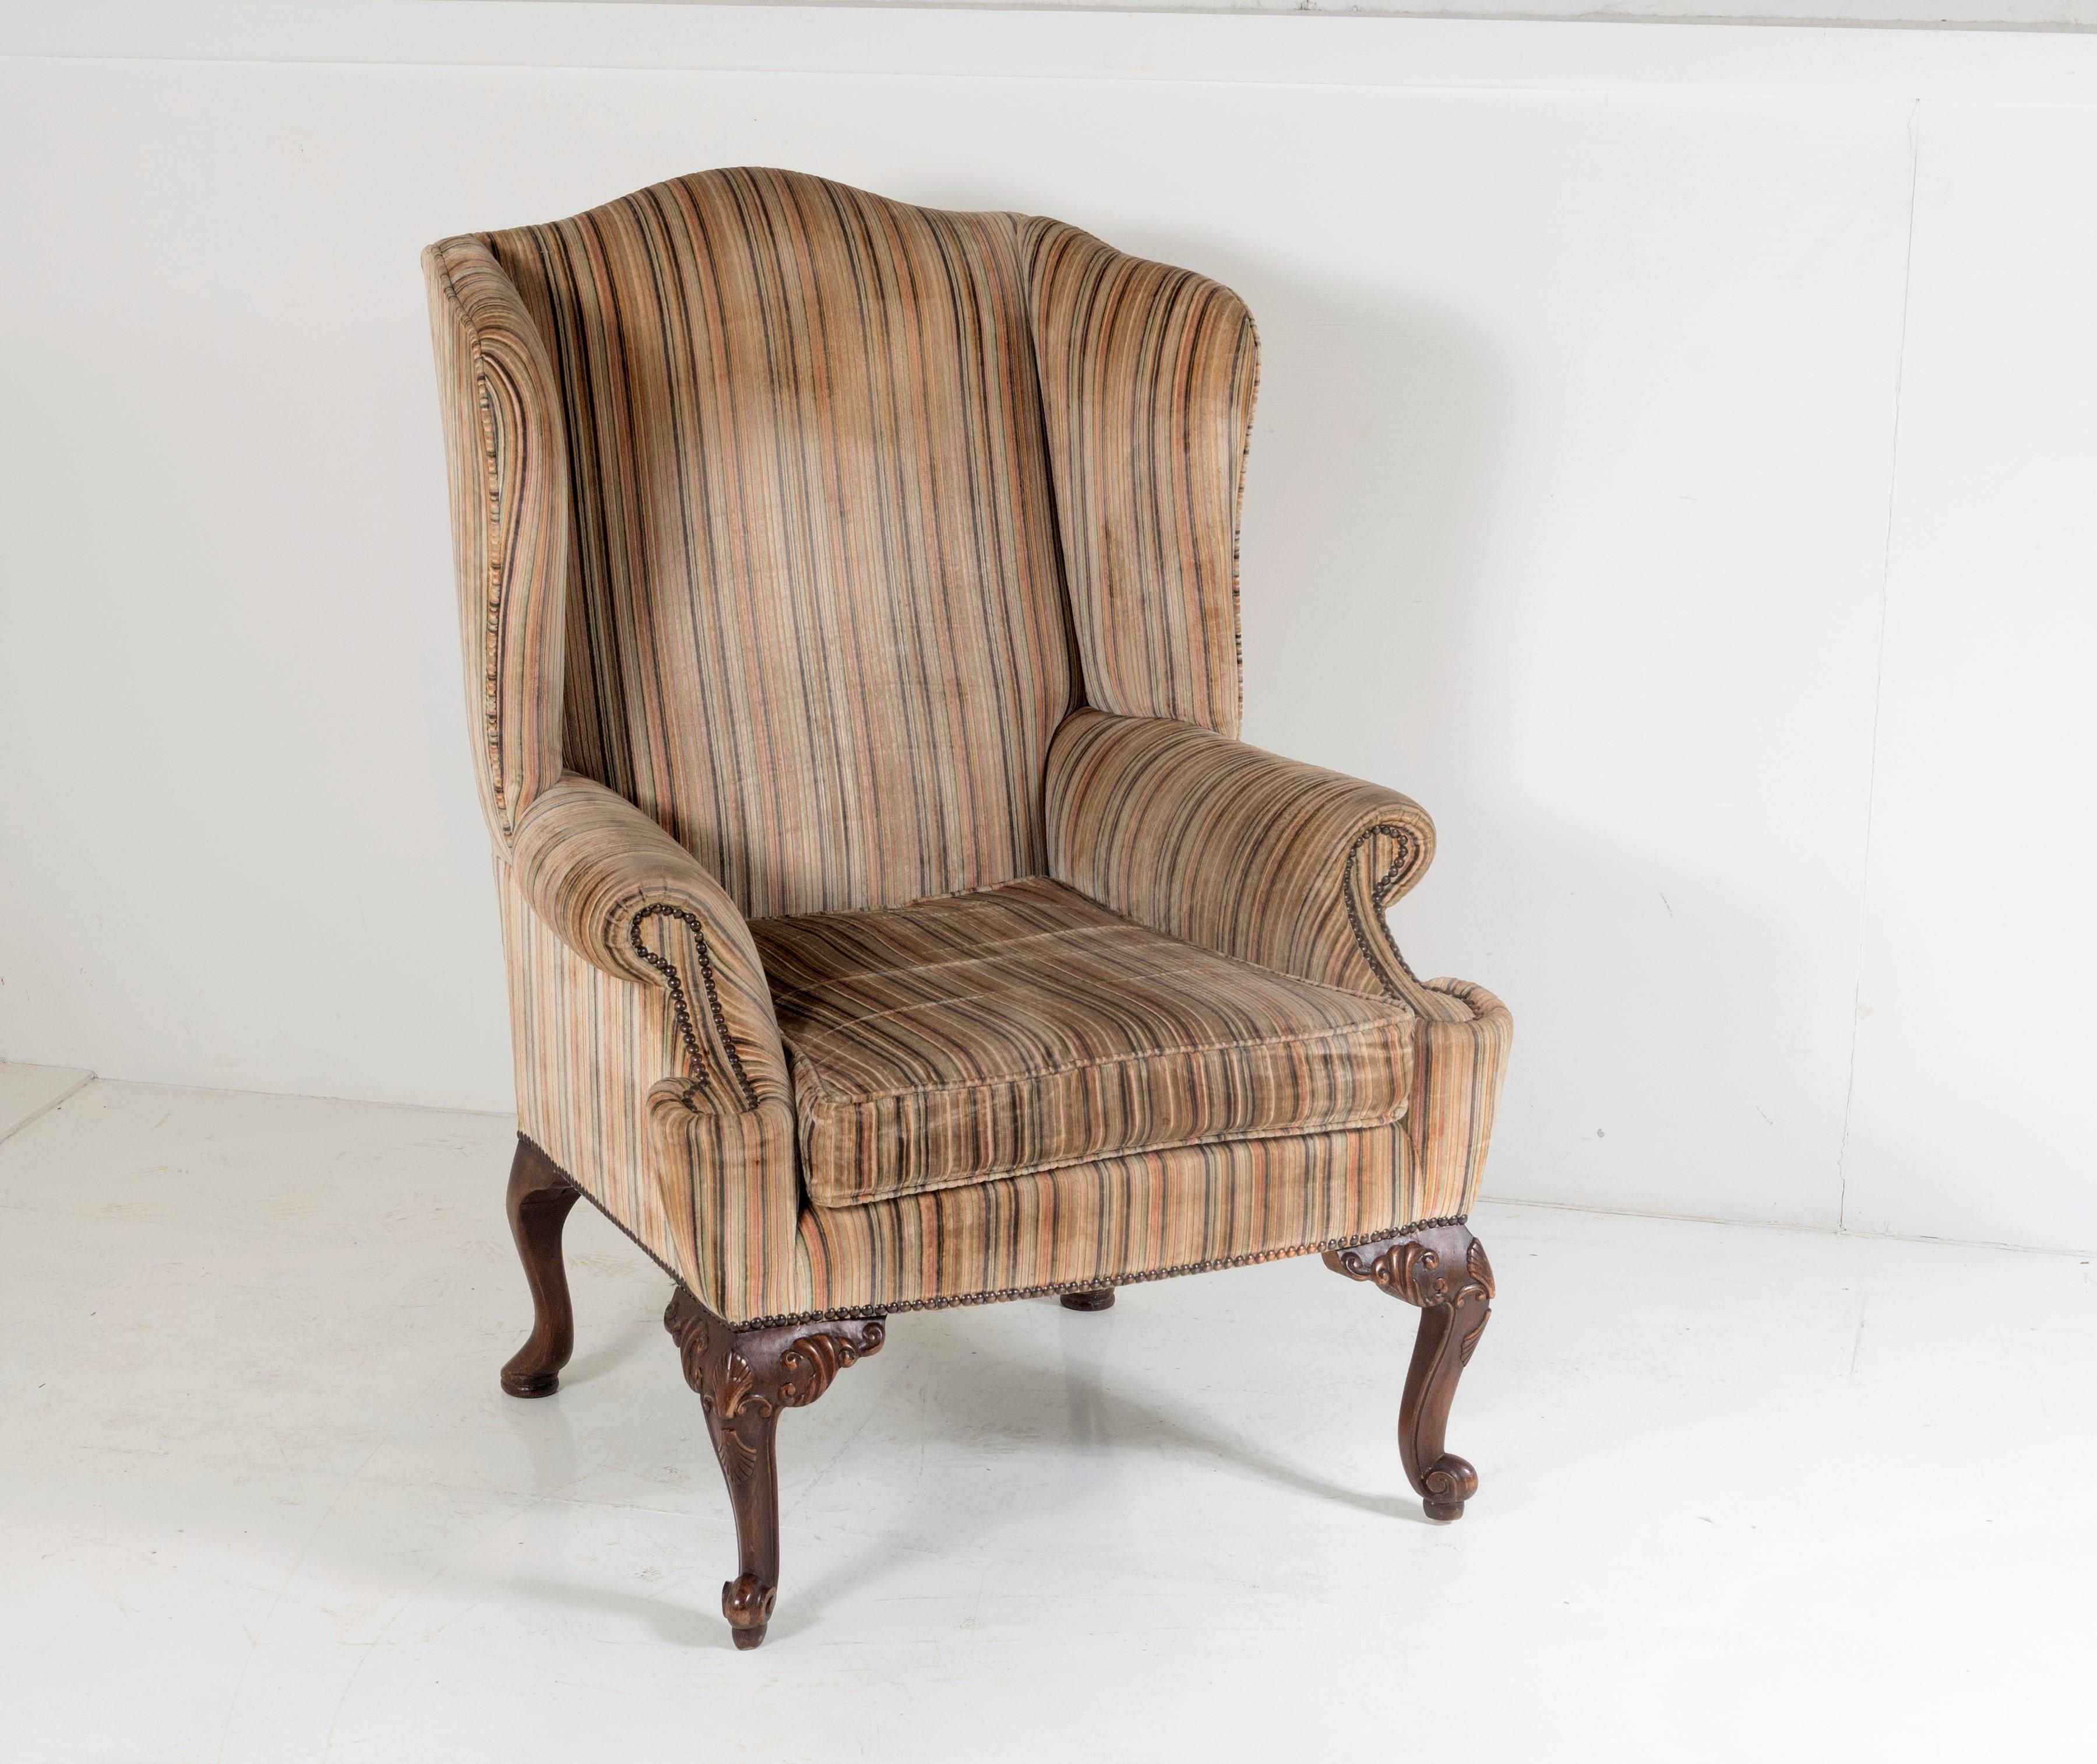 Stylish George III Style Wing Back Armchair in Original Striped Upholstery For Sale 5